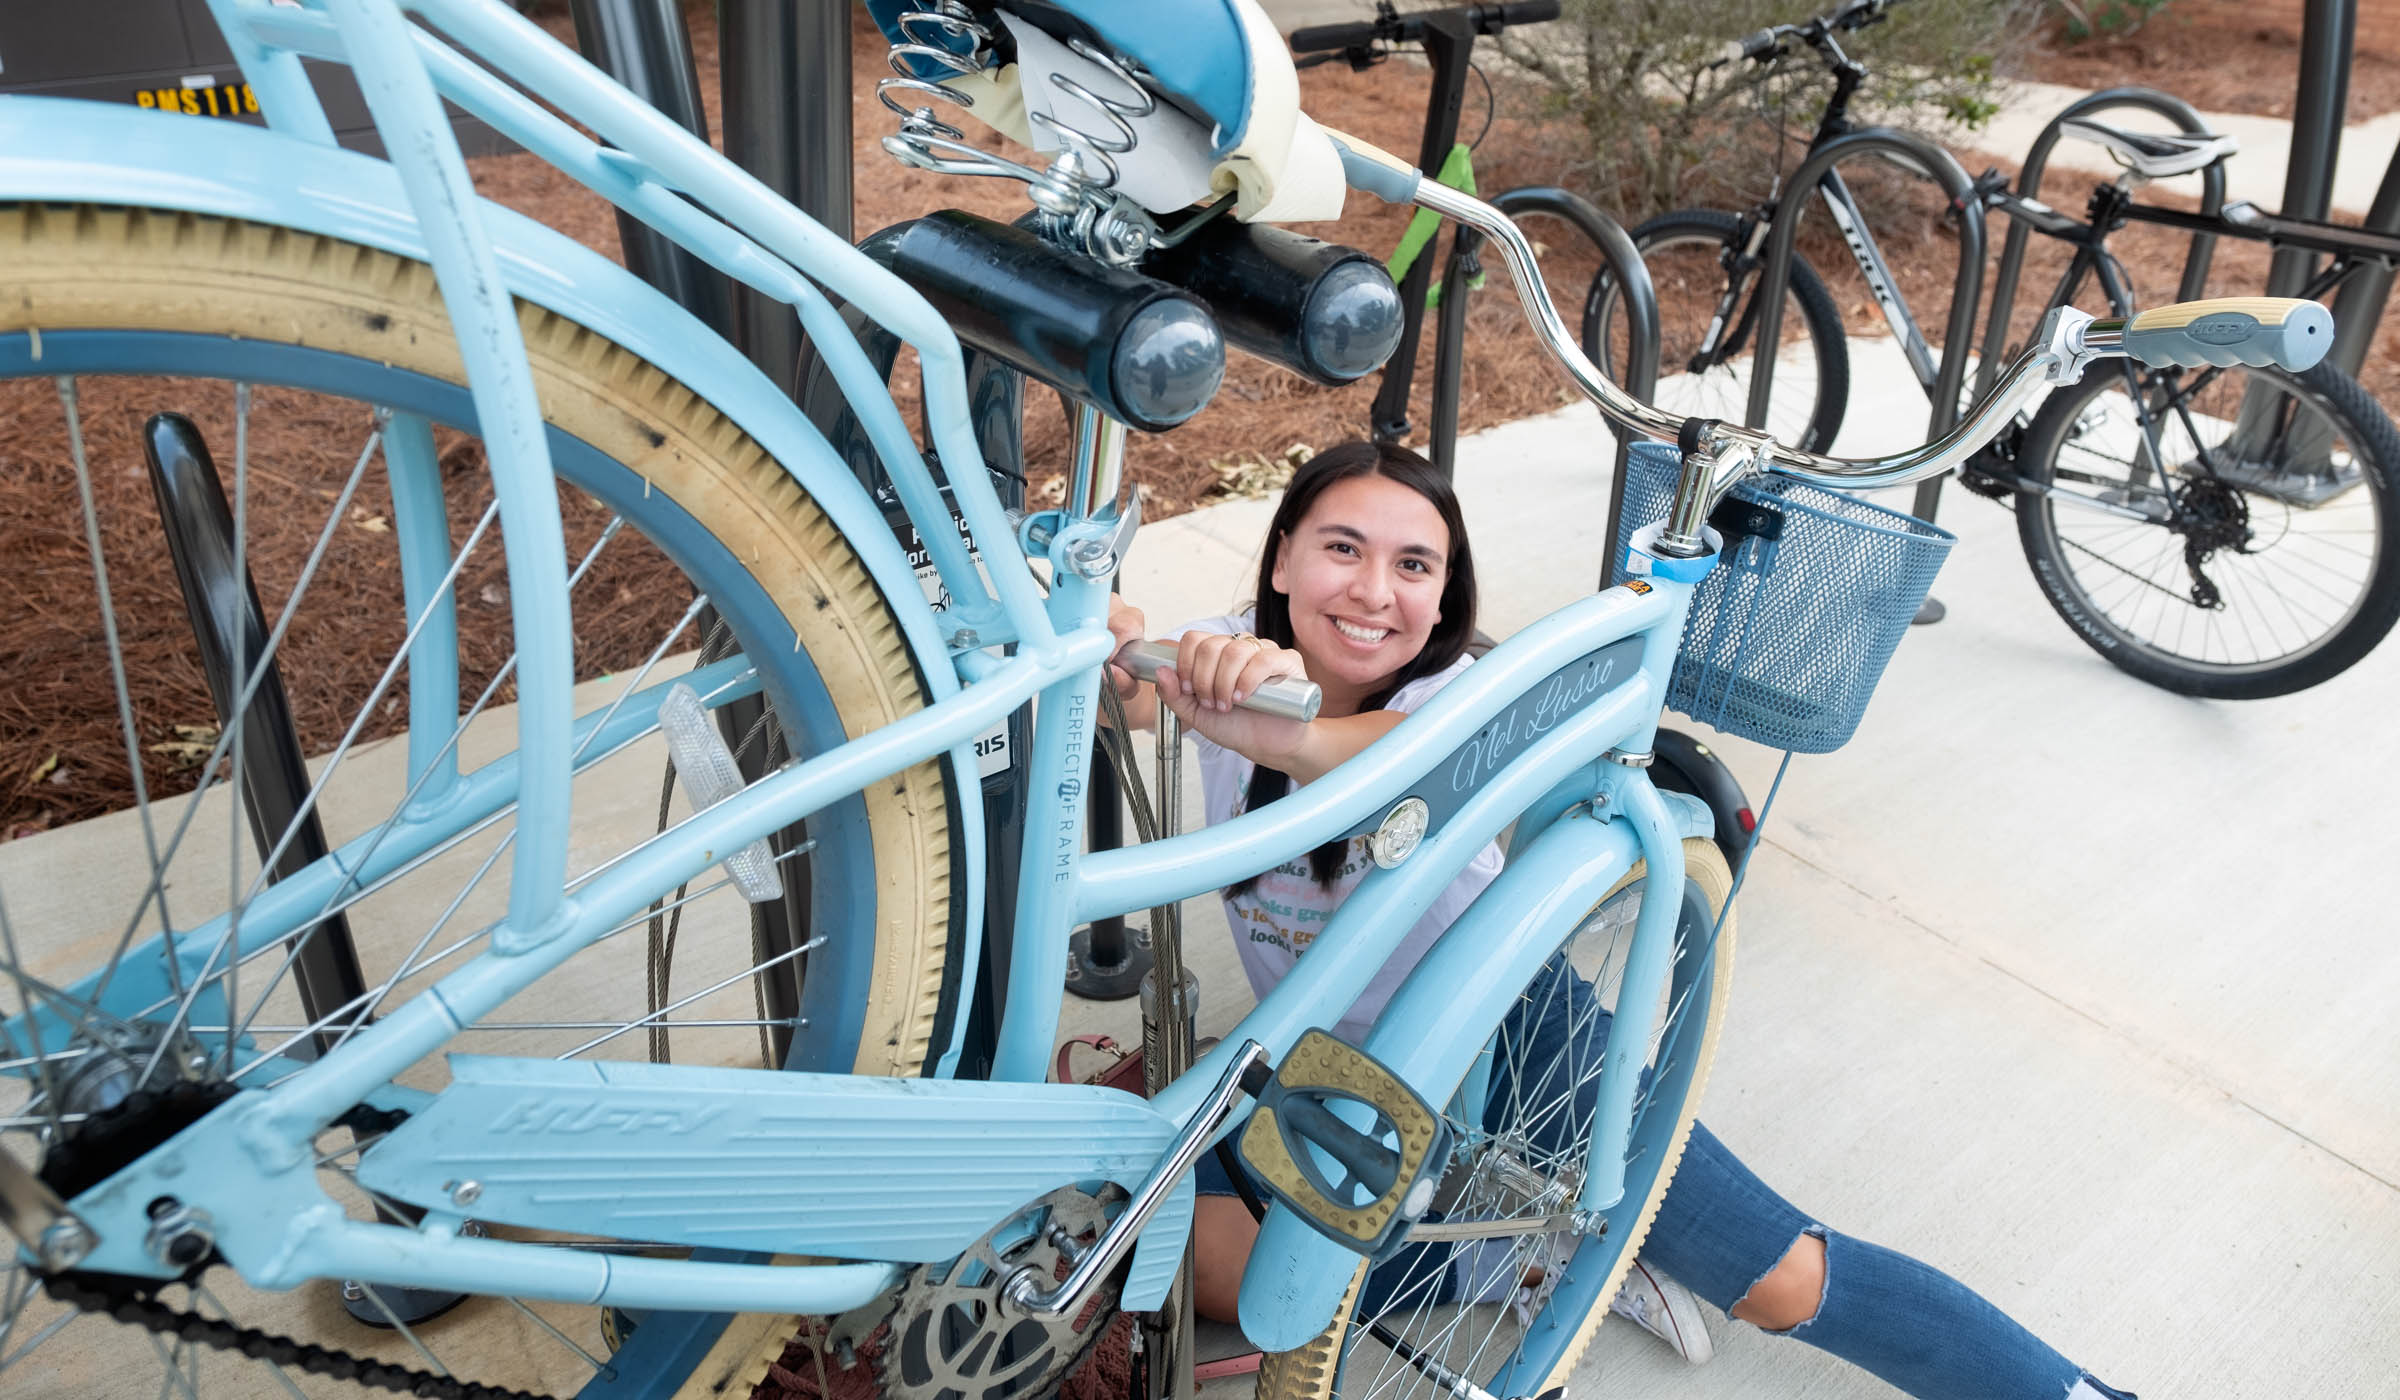 Looking up at the camera with her face framed by her blue bicycle, student Jayna Ben fills her bike tires at one of the covered bike stations near McCool Hall.